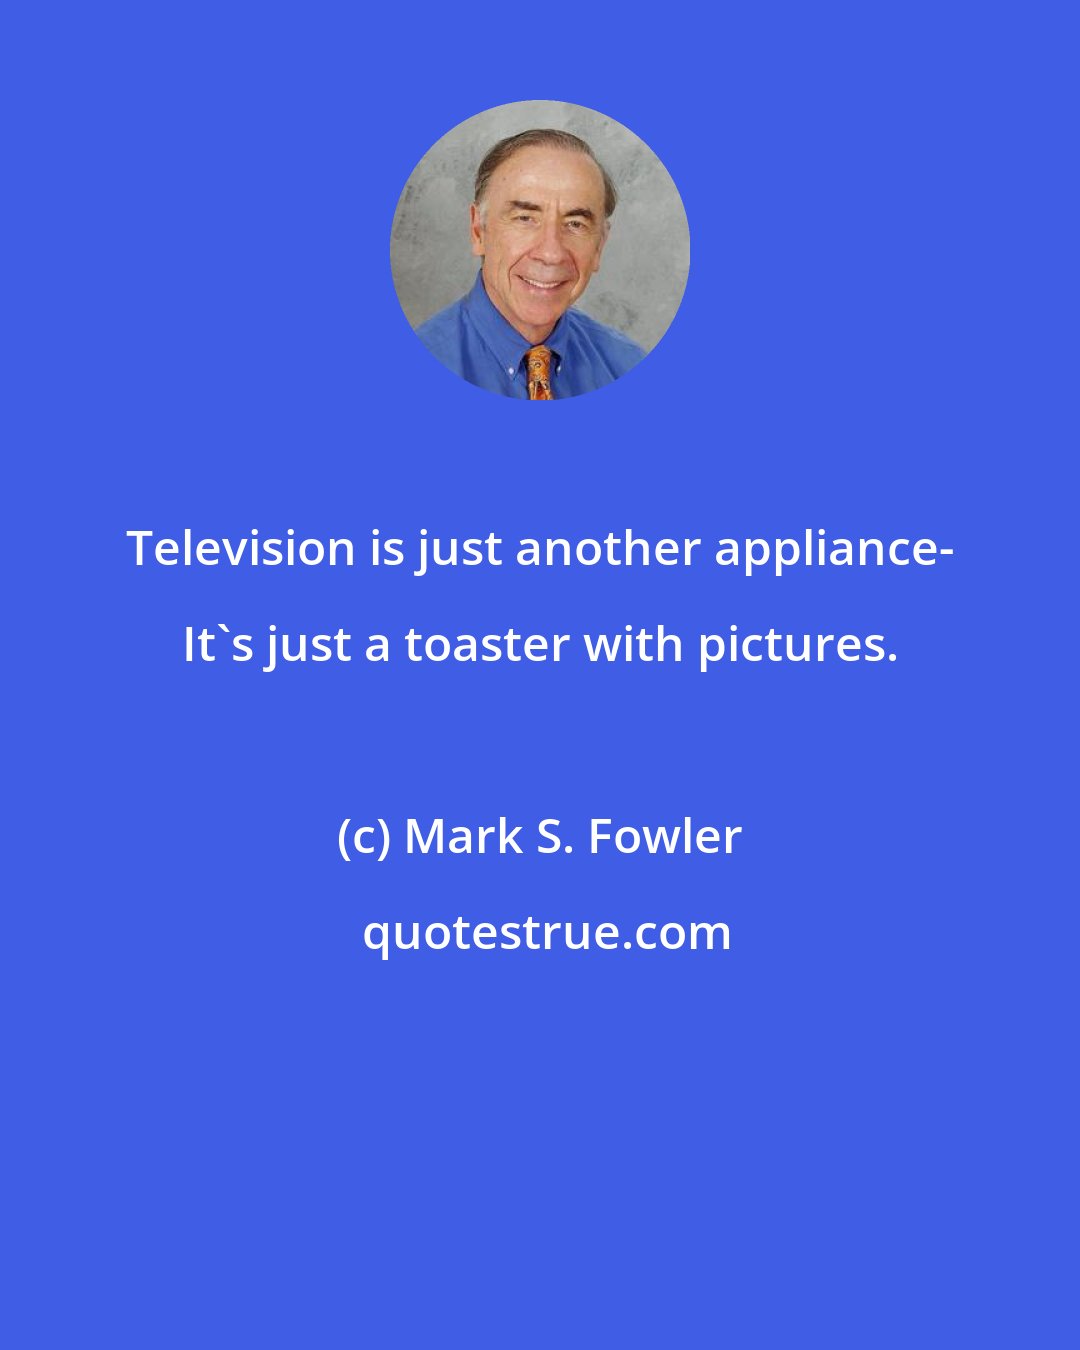 Mark S. Fowler: Television is just another appliance- It's just a toaster with pictures.